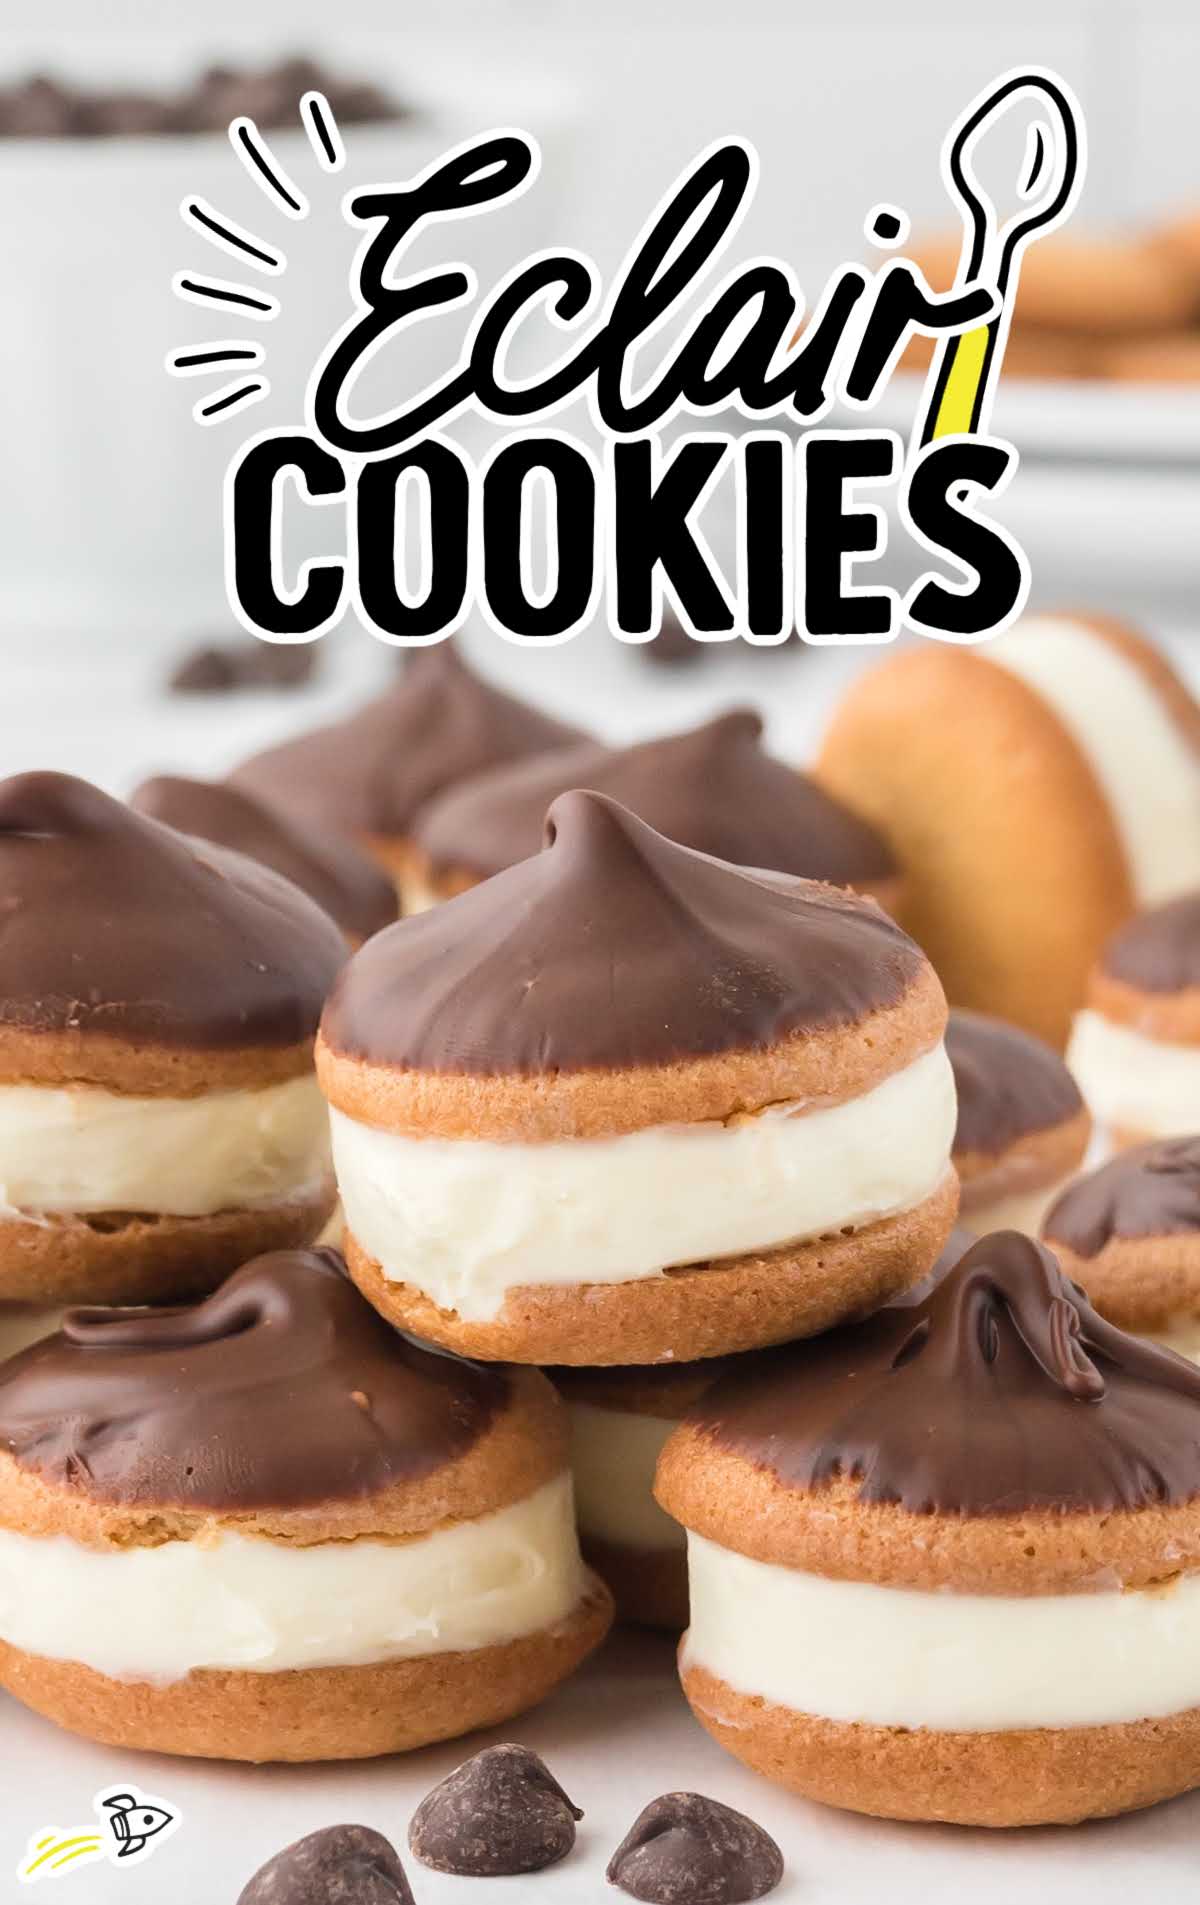 A close-up shot of Eclair Cookies piled on top of each other.